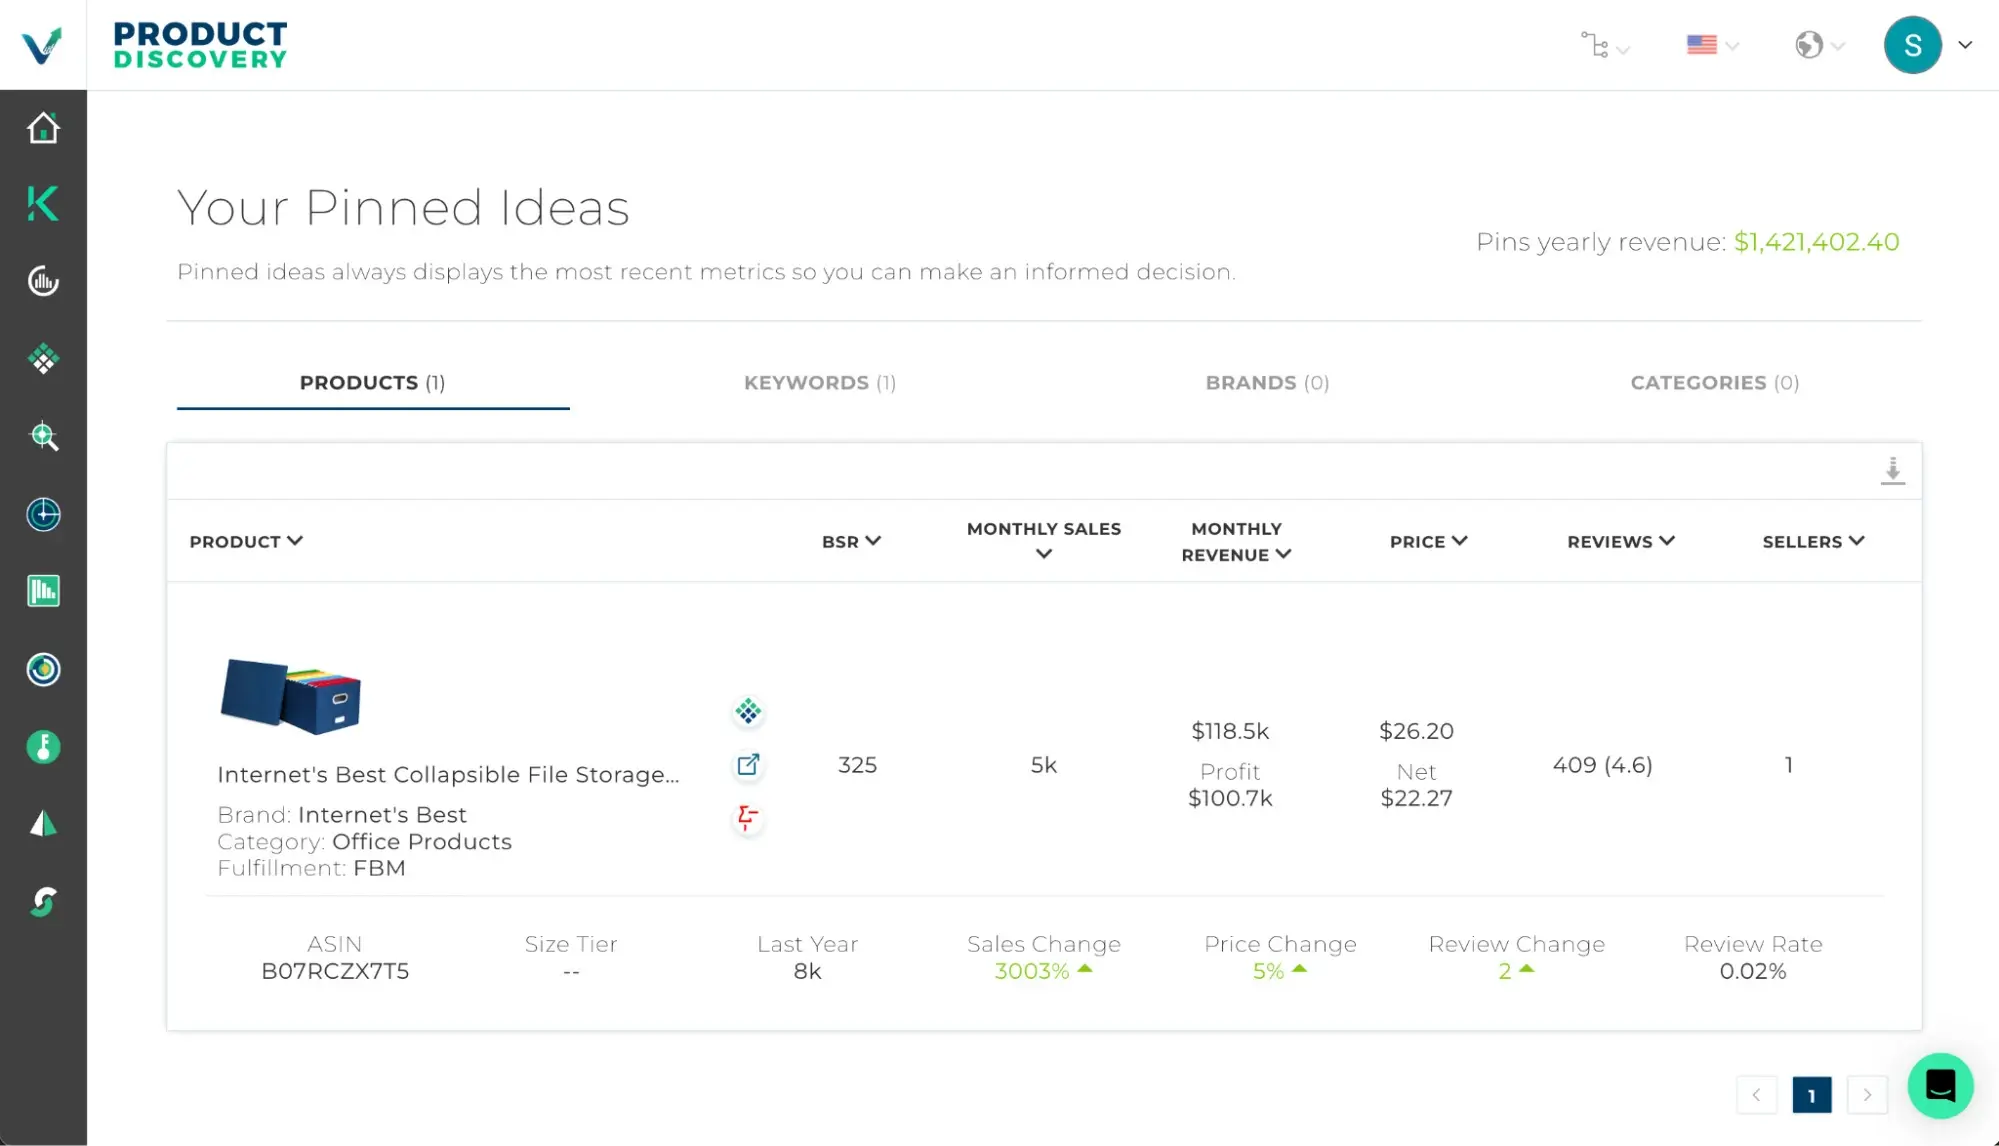 A graphic displaying pinned product ideas in Viral Launch's product discovery tool.